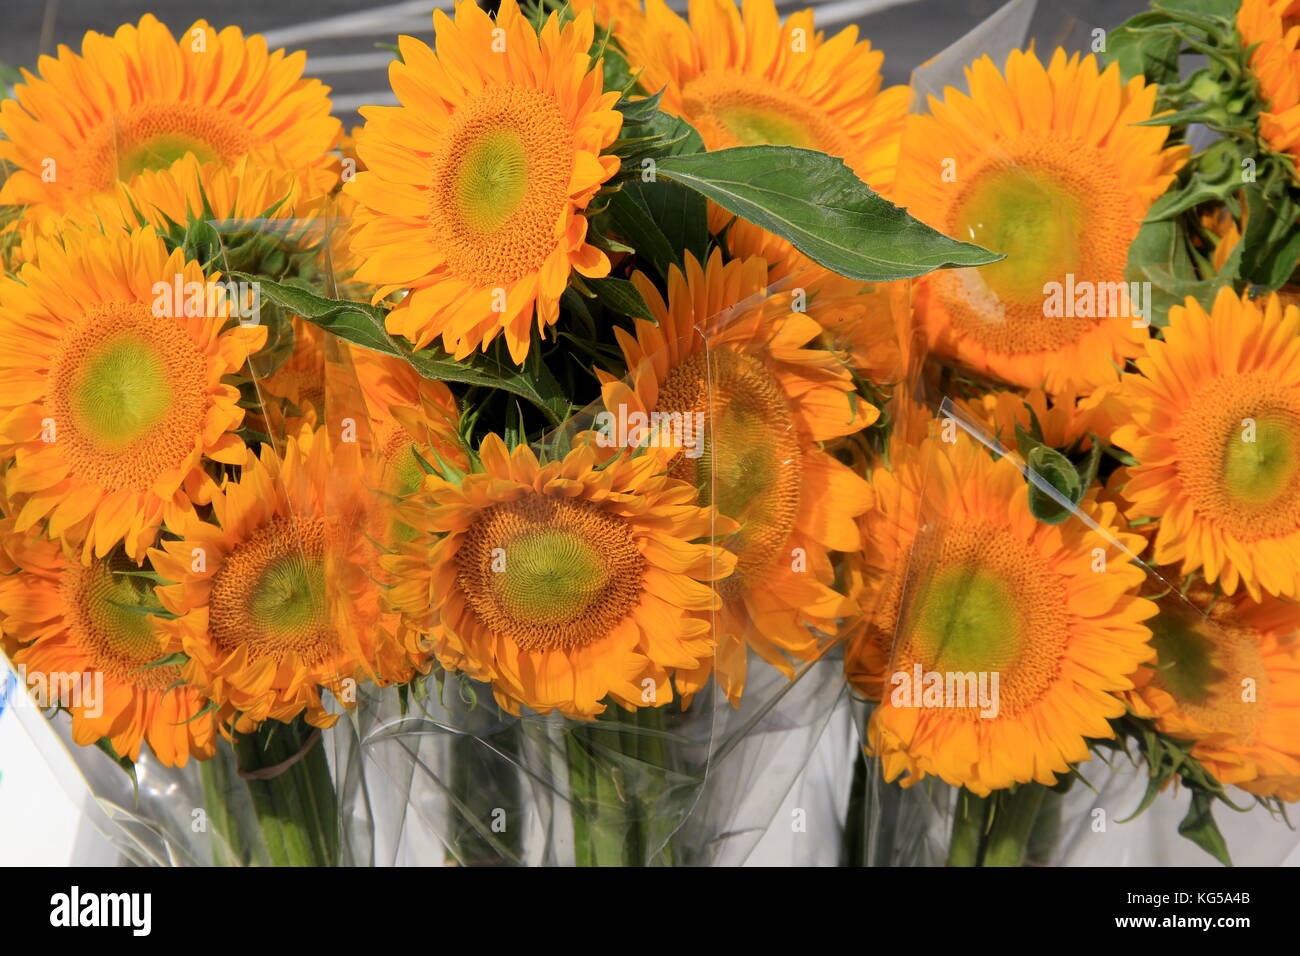 Bunches of sunflowers wrapped in cellophane for sale at outdoor farmers market, where people can grab a bouquet to bring home for loved one. Stock Photo